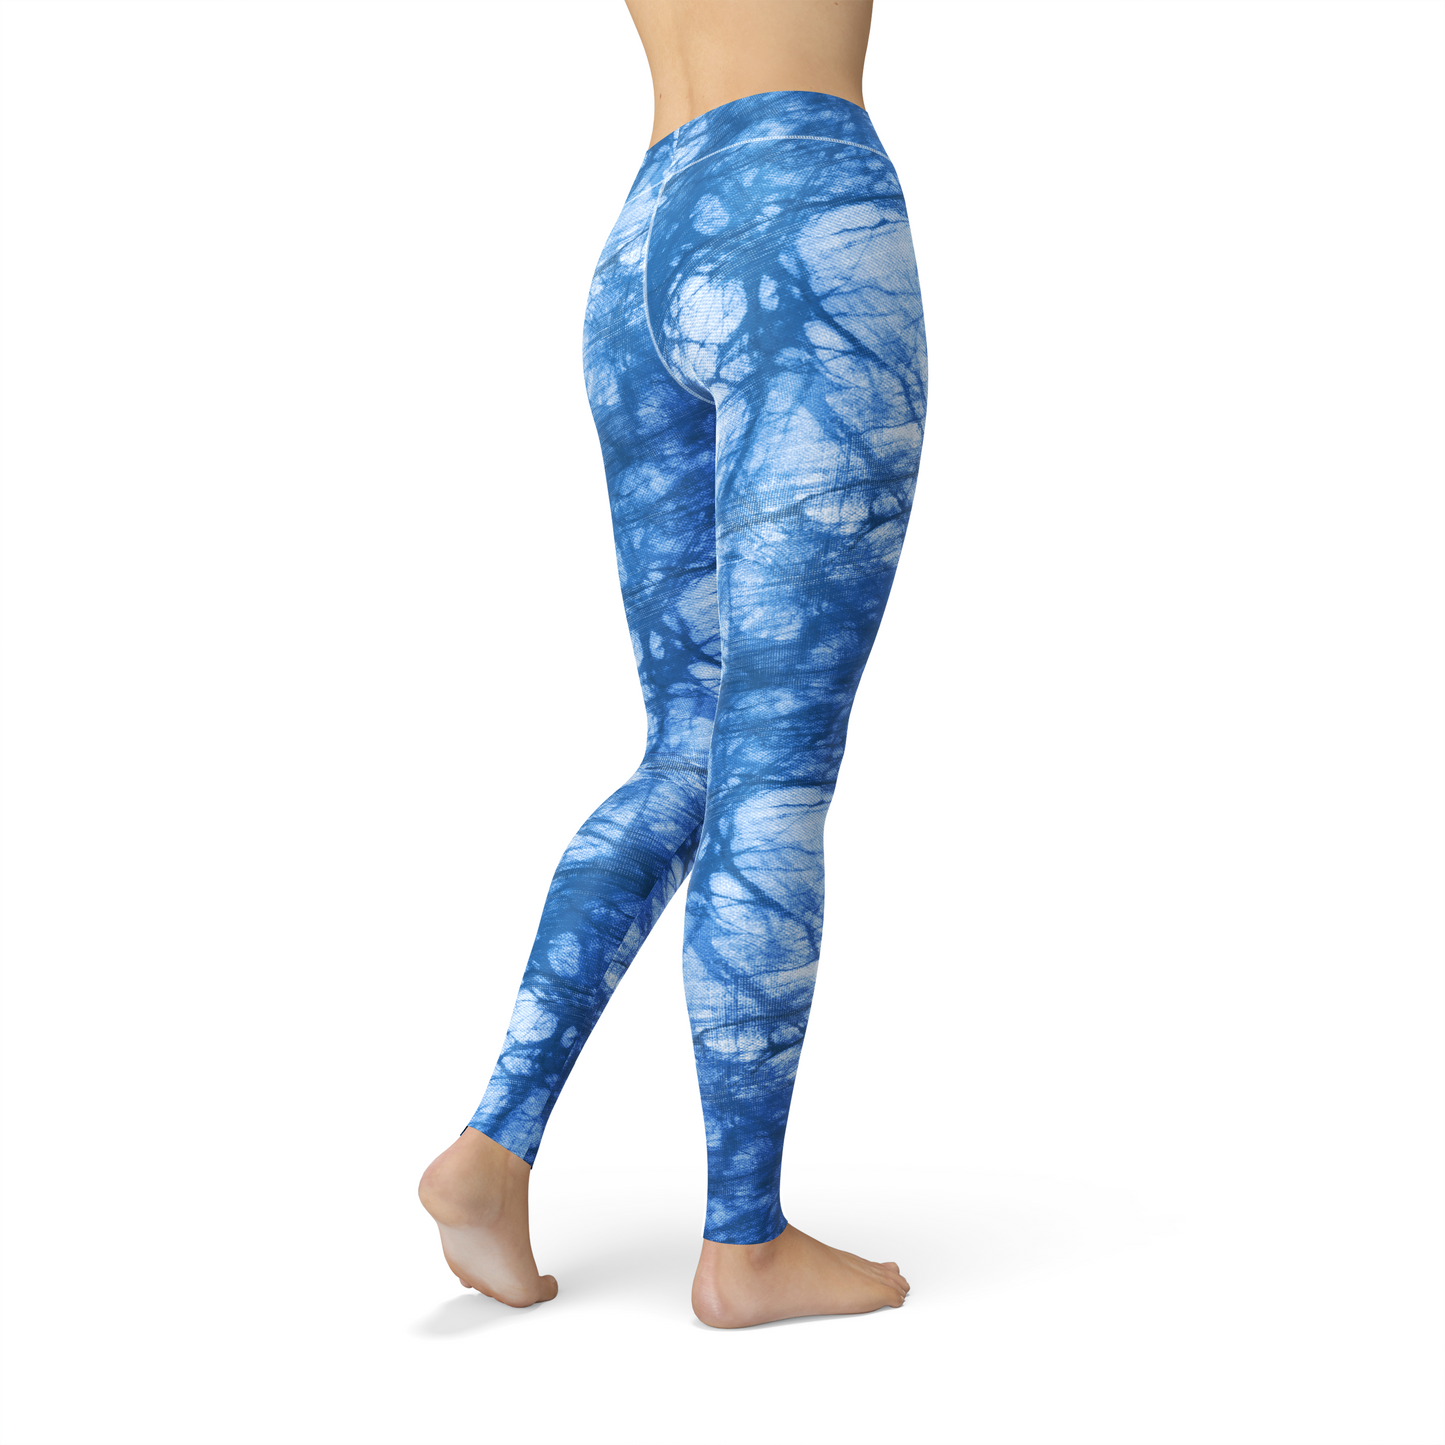 Shop our Aqua Leggings for a perfect blend of style and comfort. Ideal for your active lifestyle.